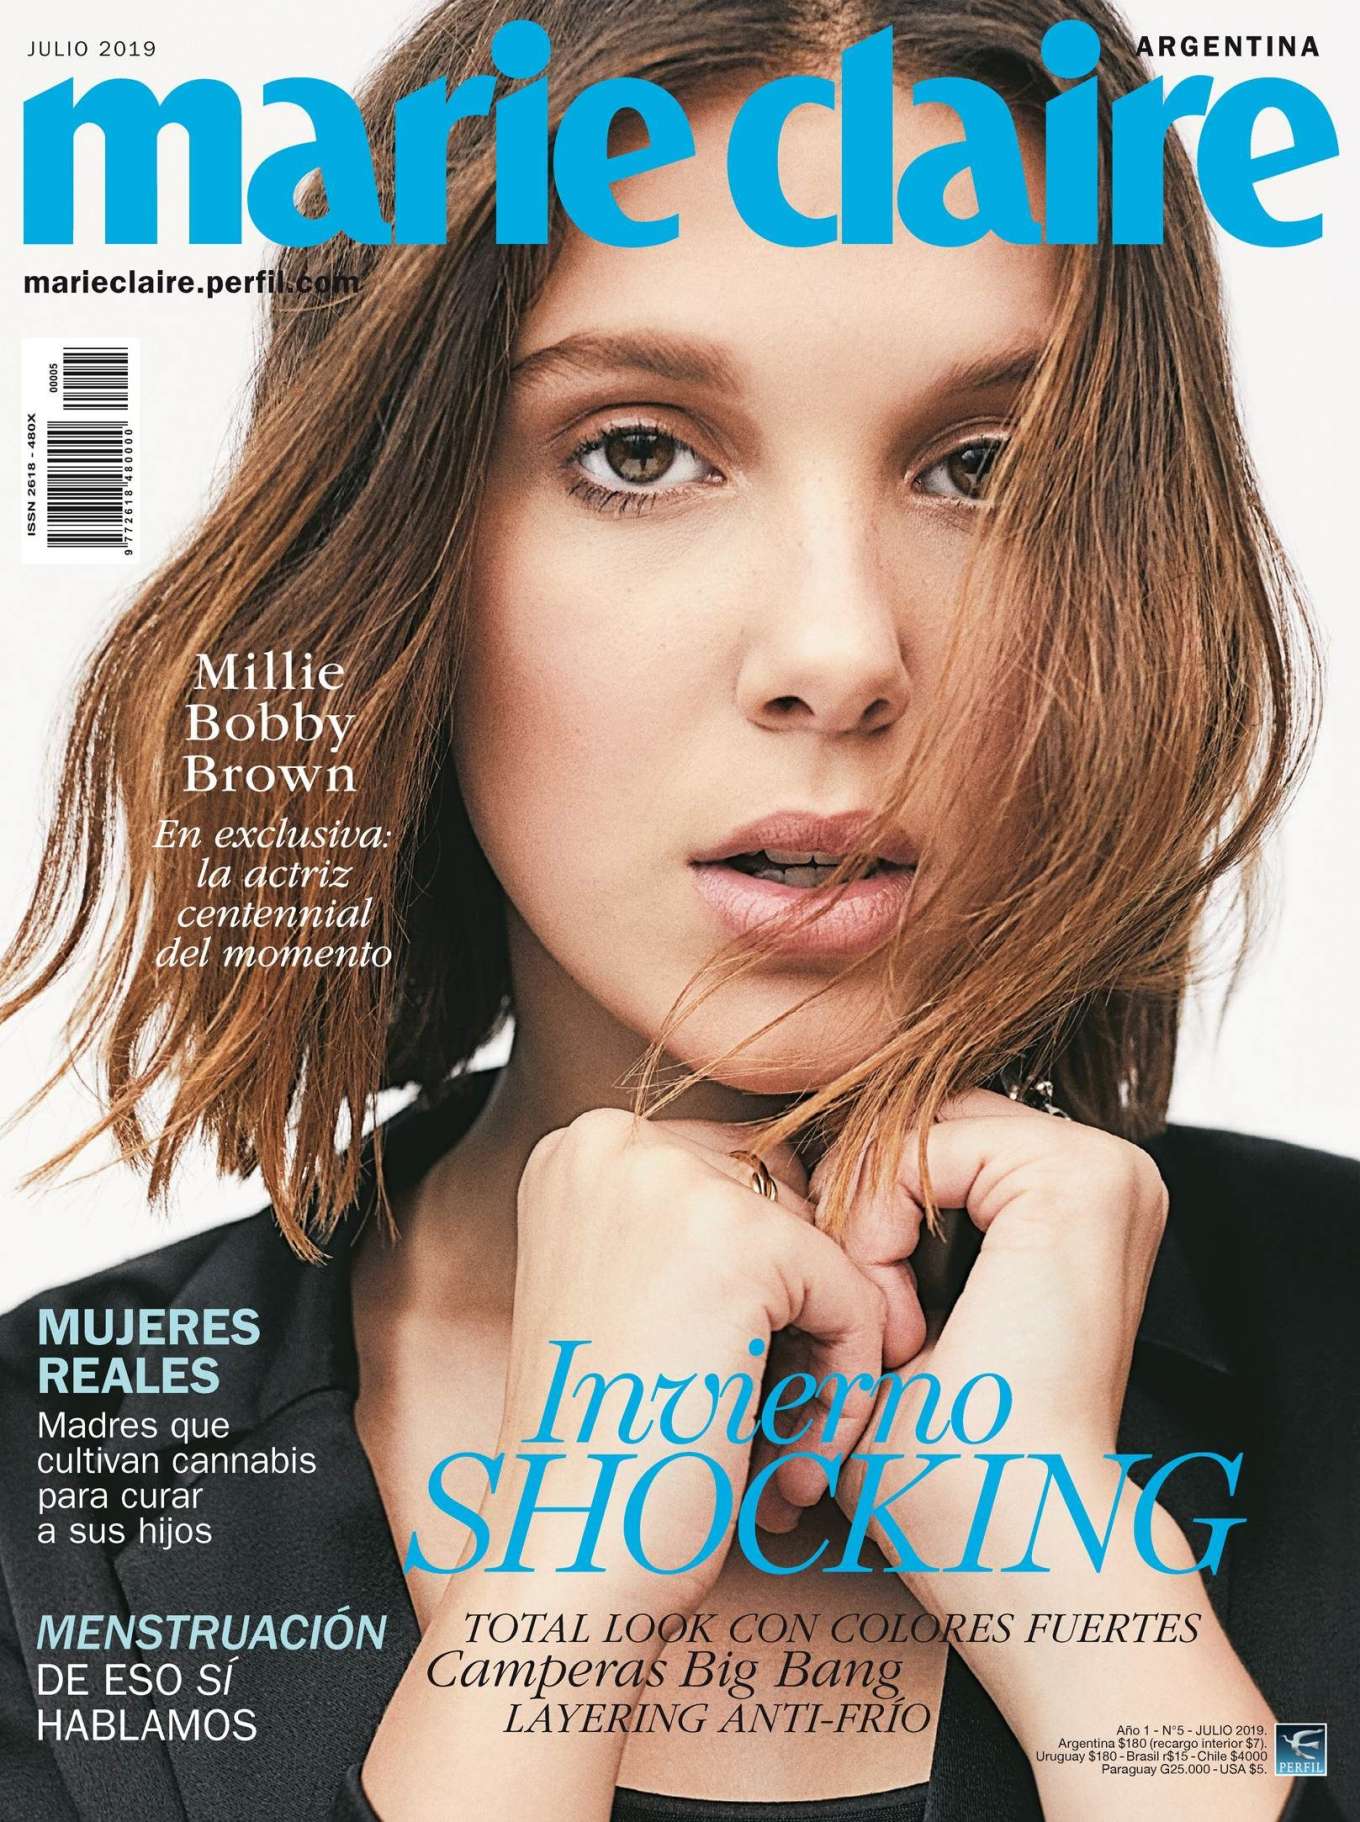 Millie Bobby Brown For Marie Claire Argentina Cover (July 2019)